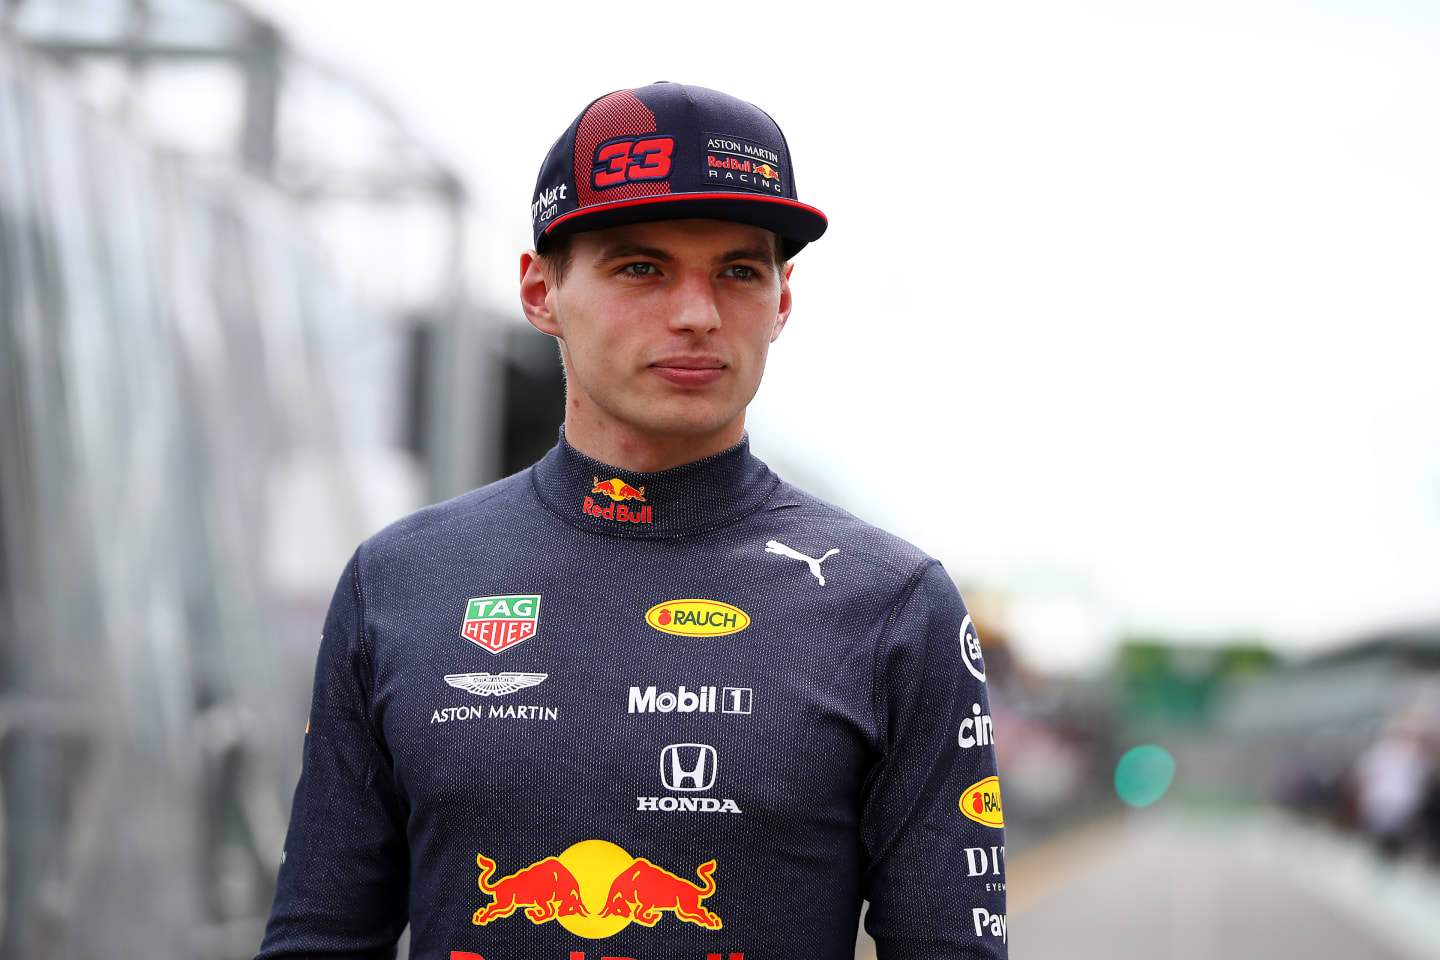 MELBOURNE, AUSTRALIA - MARCH 12: Max Verstappen of Netherlands and Red Bull Racing walks in the